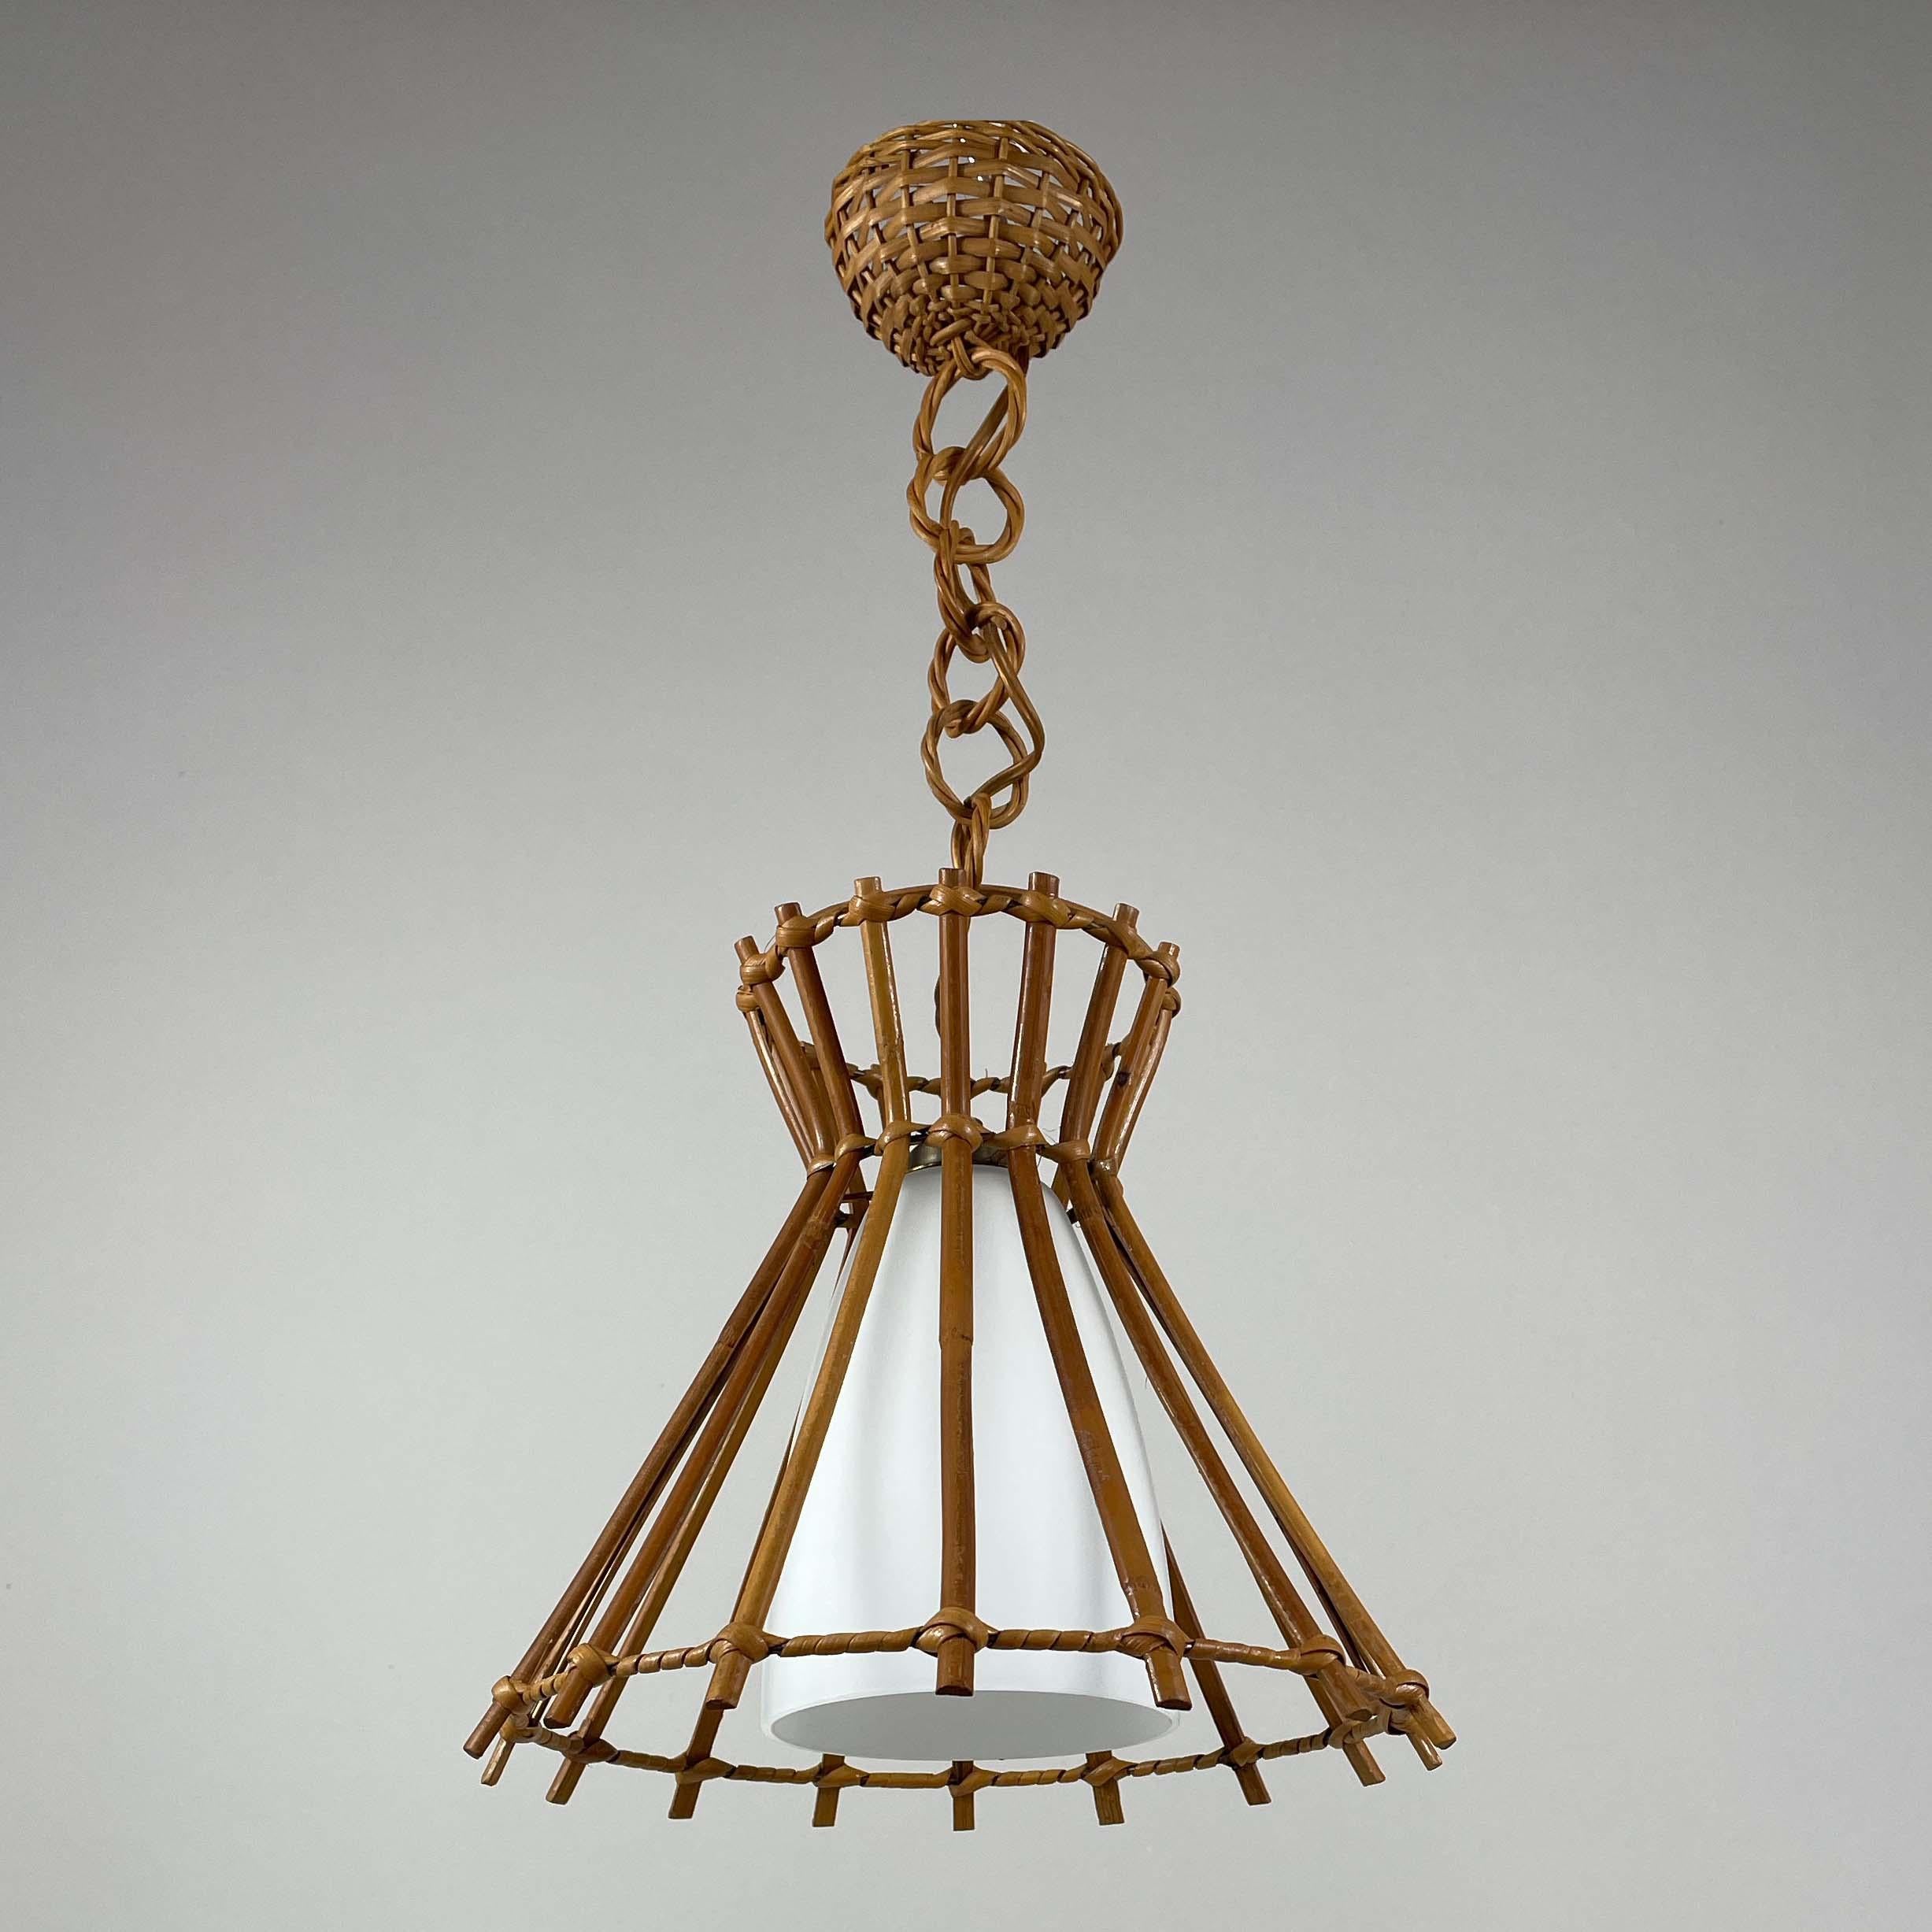 This elegant Riviera Style pendant or lantern was designed and manufactured in France in the late 1950s. It is rather similar to lights designed by Louis Sognot.

The pendant features a rattan body, rattan drop and rattan canopy. The inside